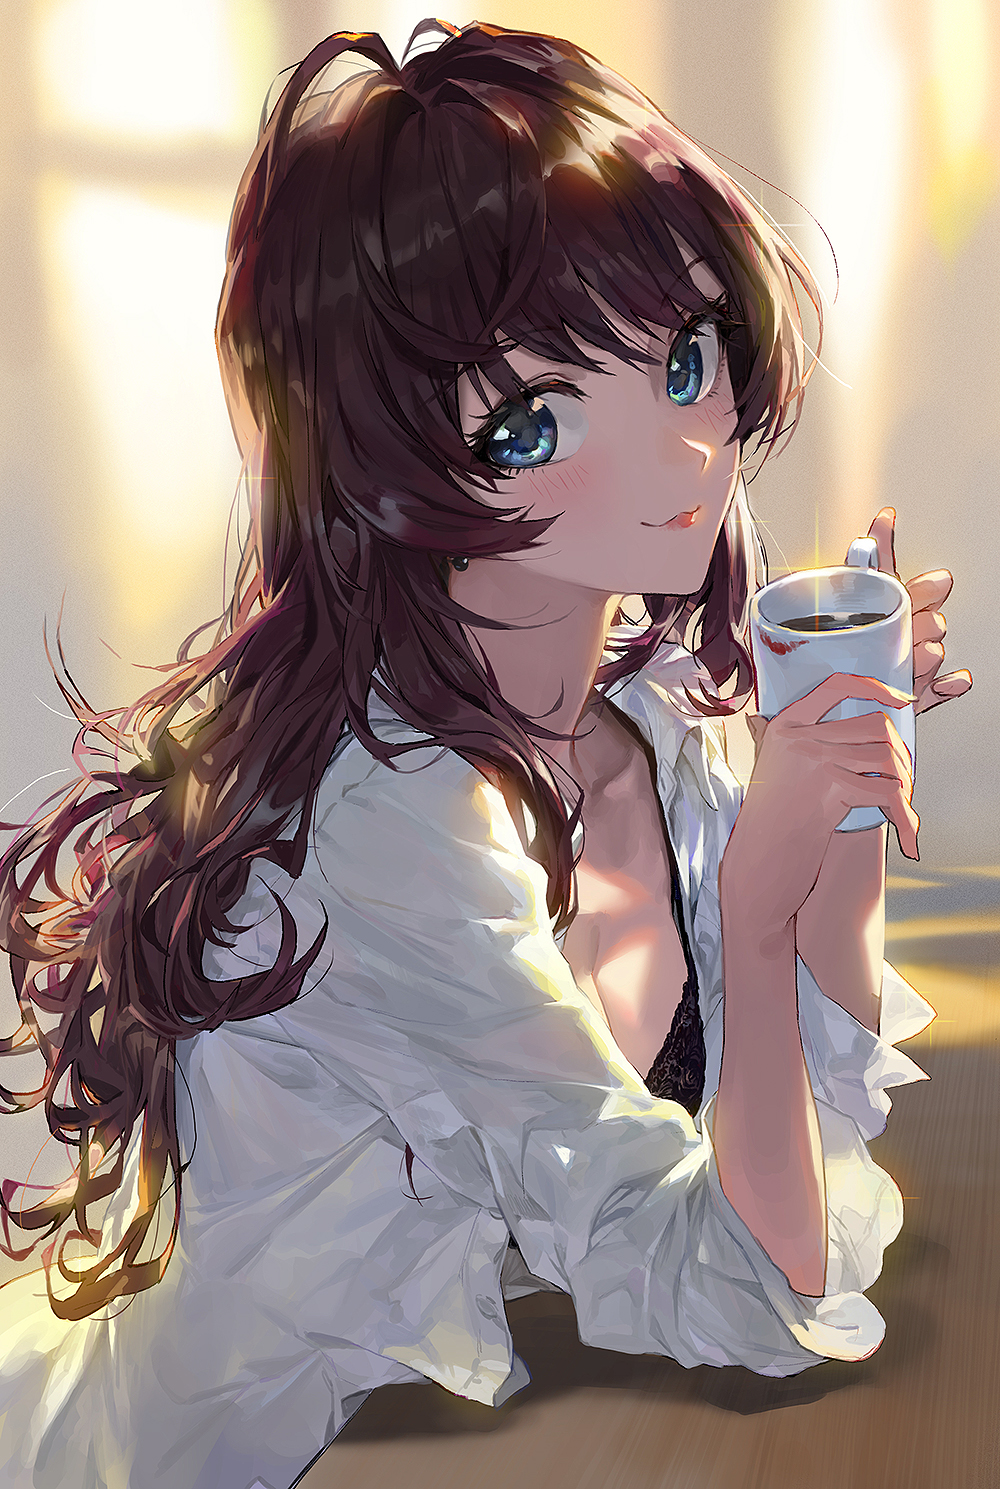 Anime 1000x1489 anime anime girls cup blue eyes long hair brunette Mossi (artist) THE iDOLM@STER Ichinose Shiki